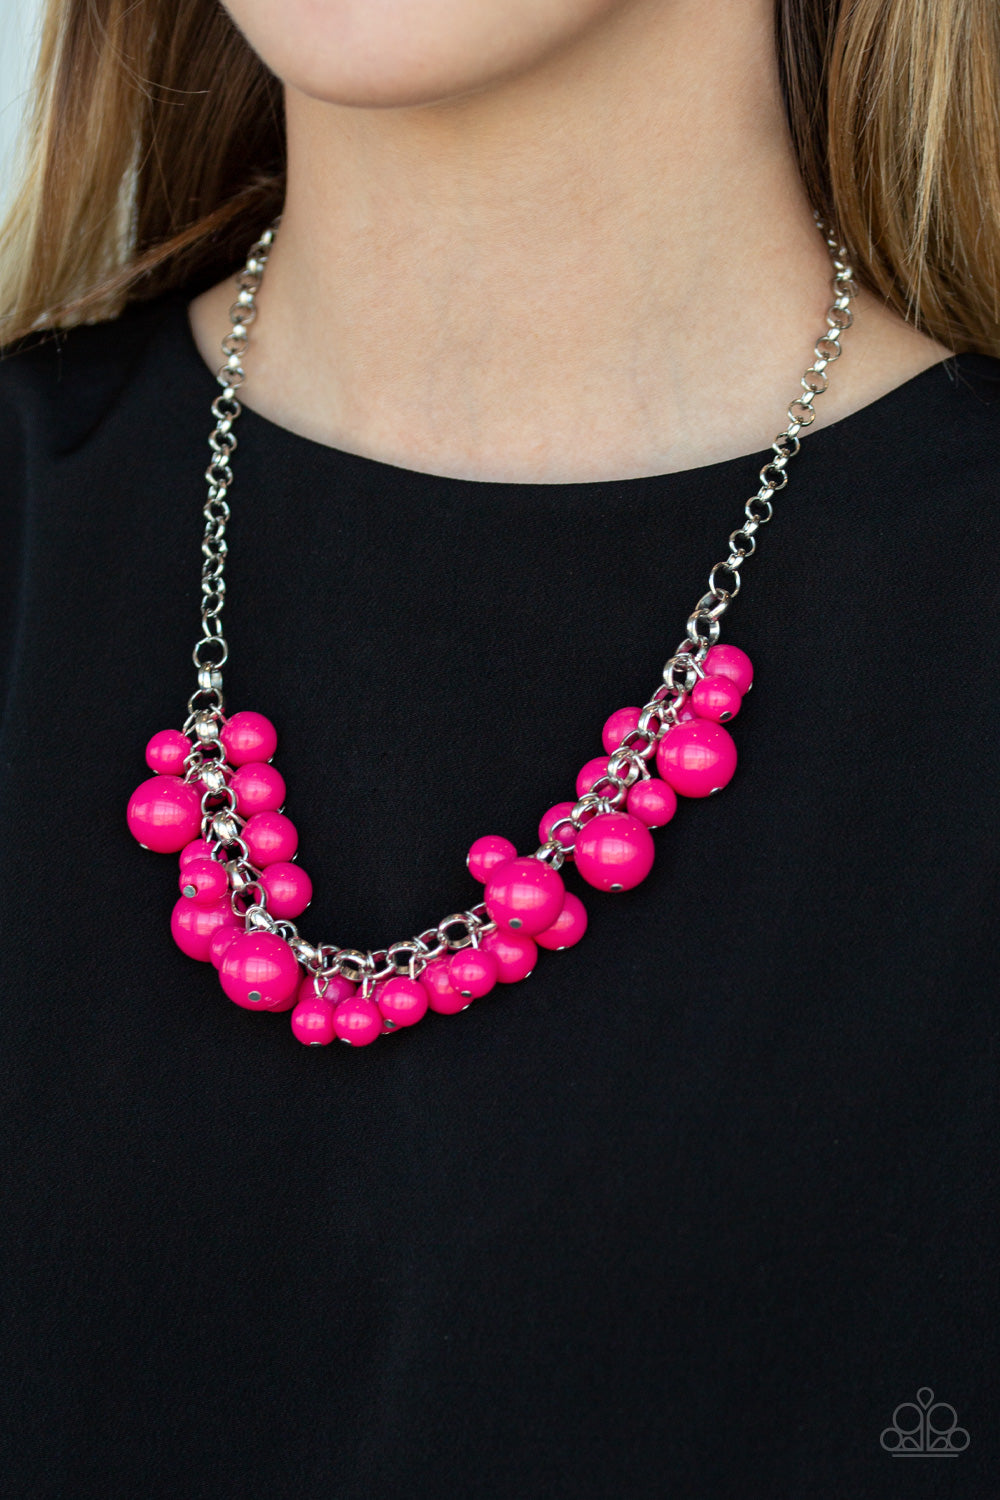 Paparazzi Walk This BROADWAY - Pink Necklace